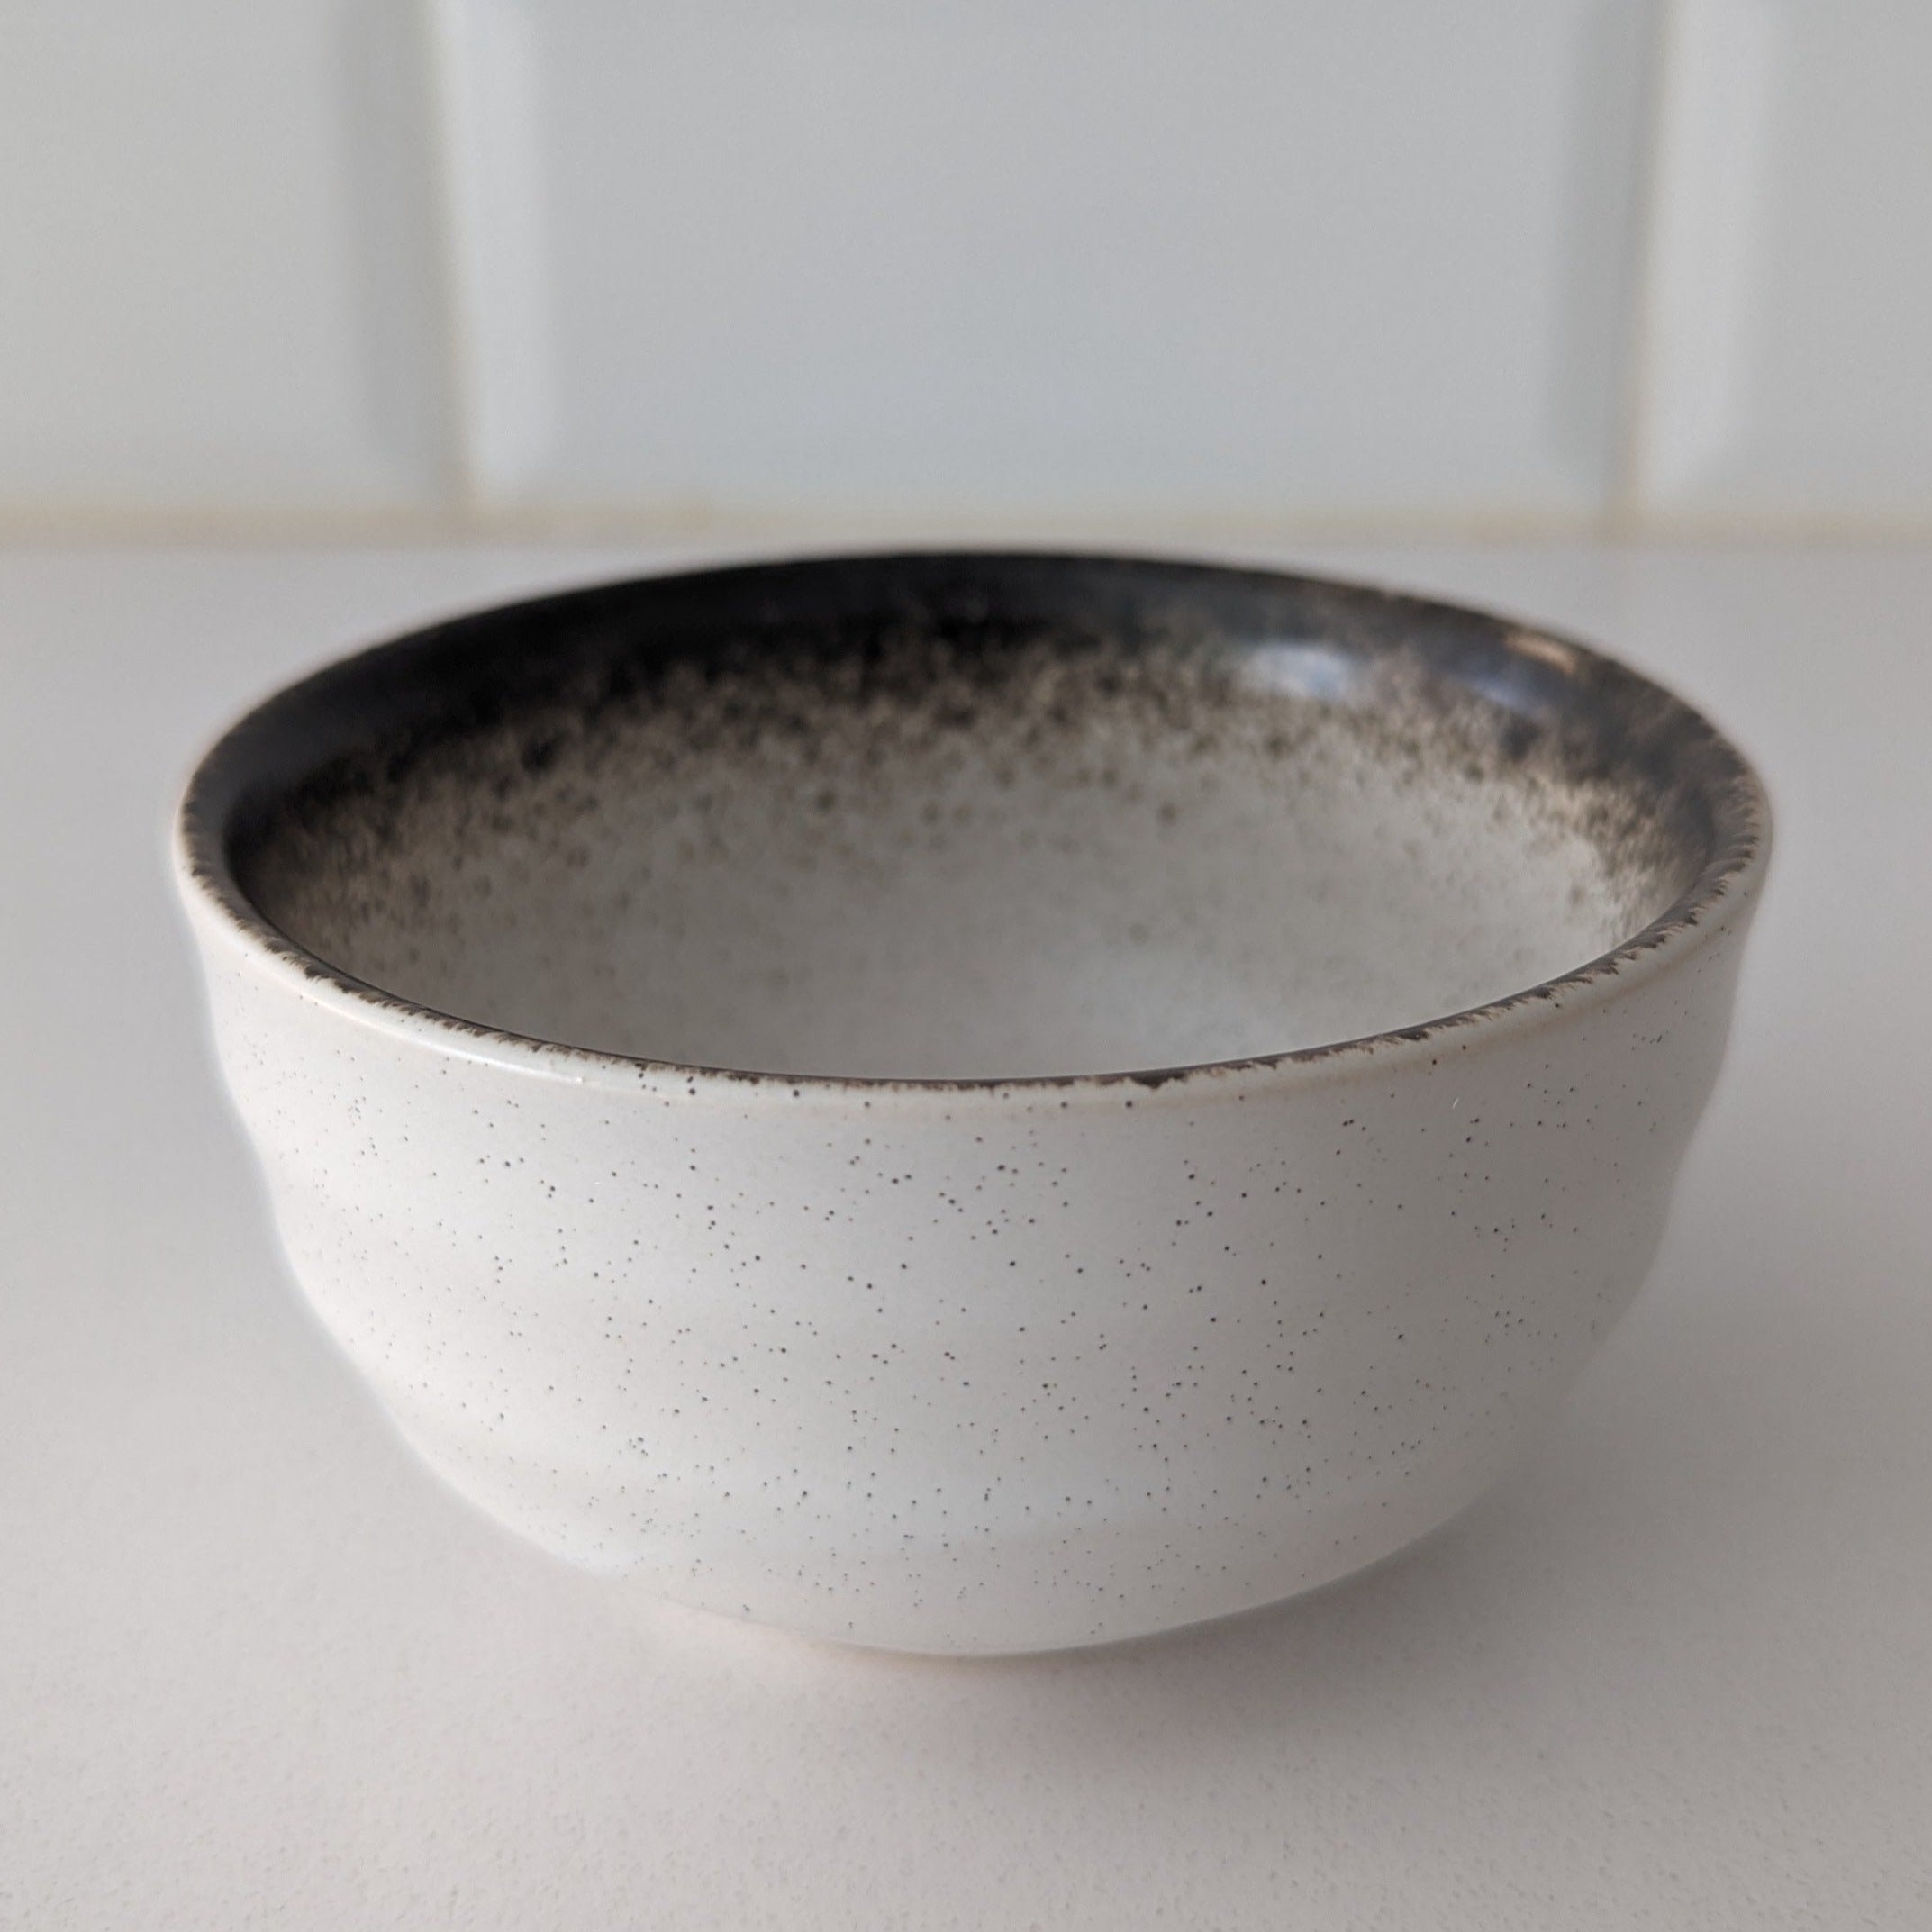 Matcha Bowl (or Chawan) in White with Brown Speckles. Part of the Matcha Green Tea Gift Set from Very Craftea